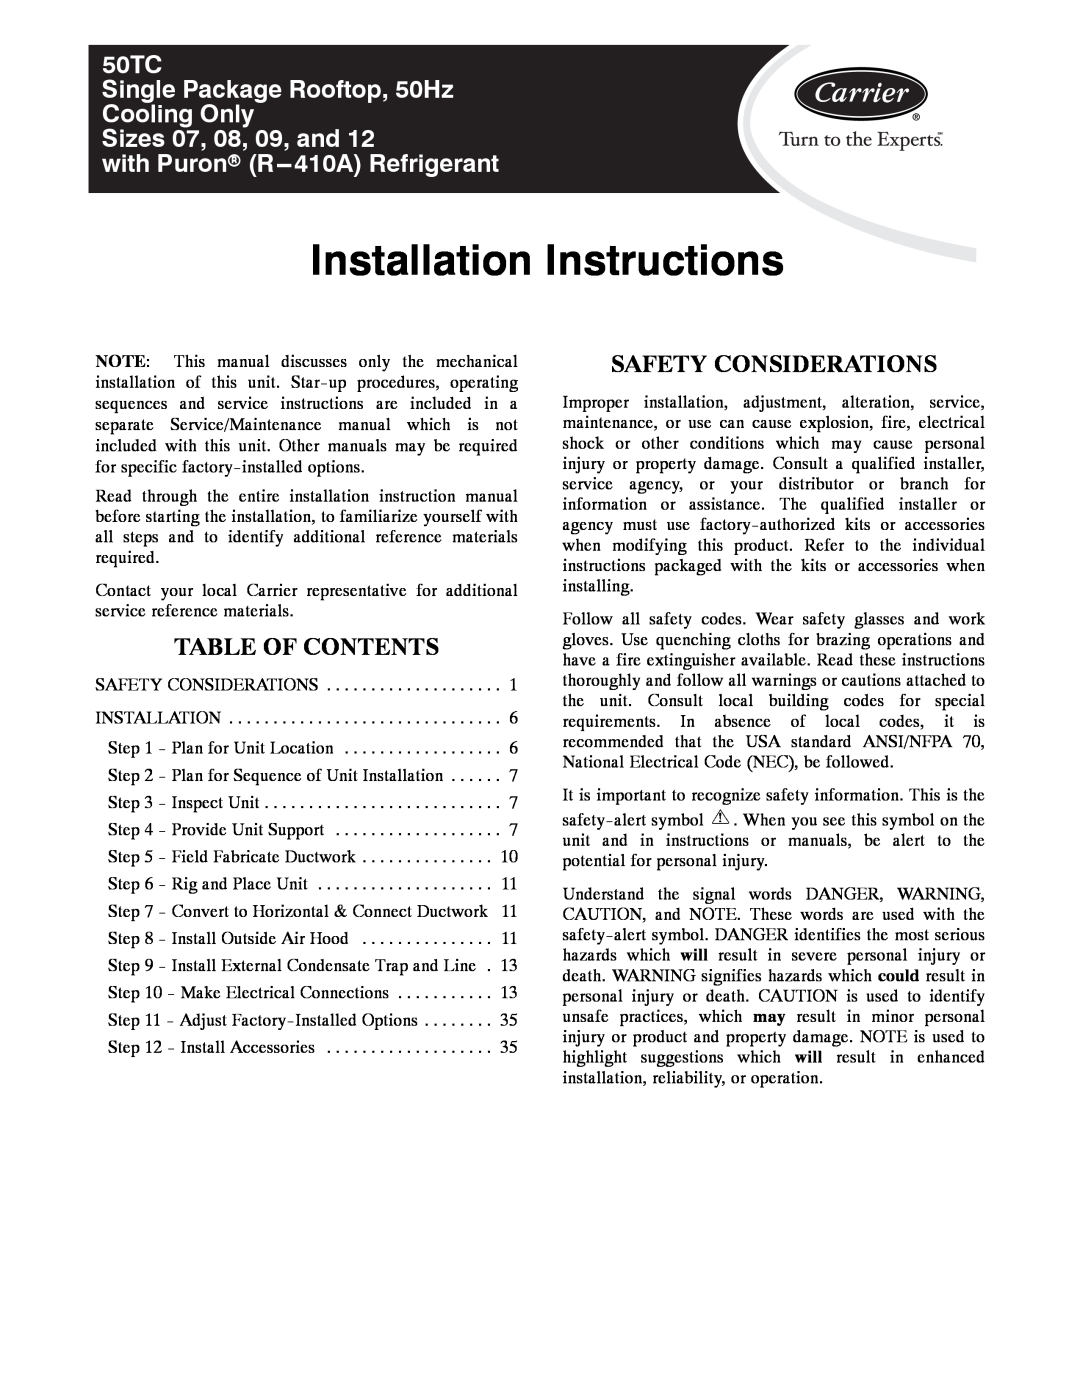 Carrier 50TC installation instructions Table Of Contents, Safety Considerations, Installation Instructions 